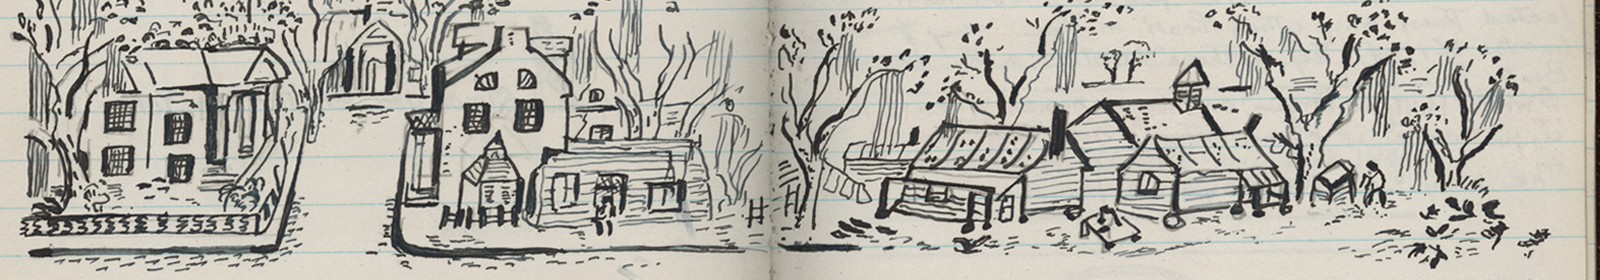 A pen drawing on lined paper shows a small town main street, including buildings and trees